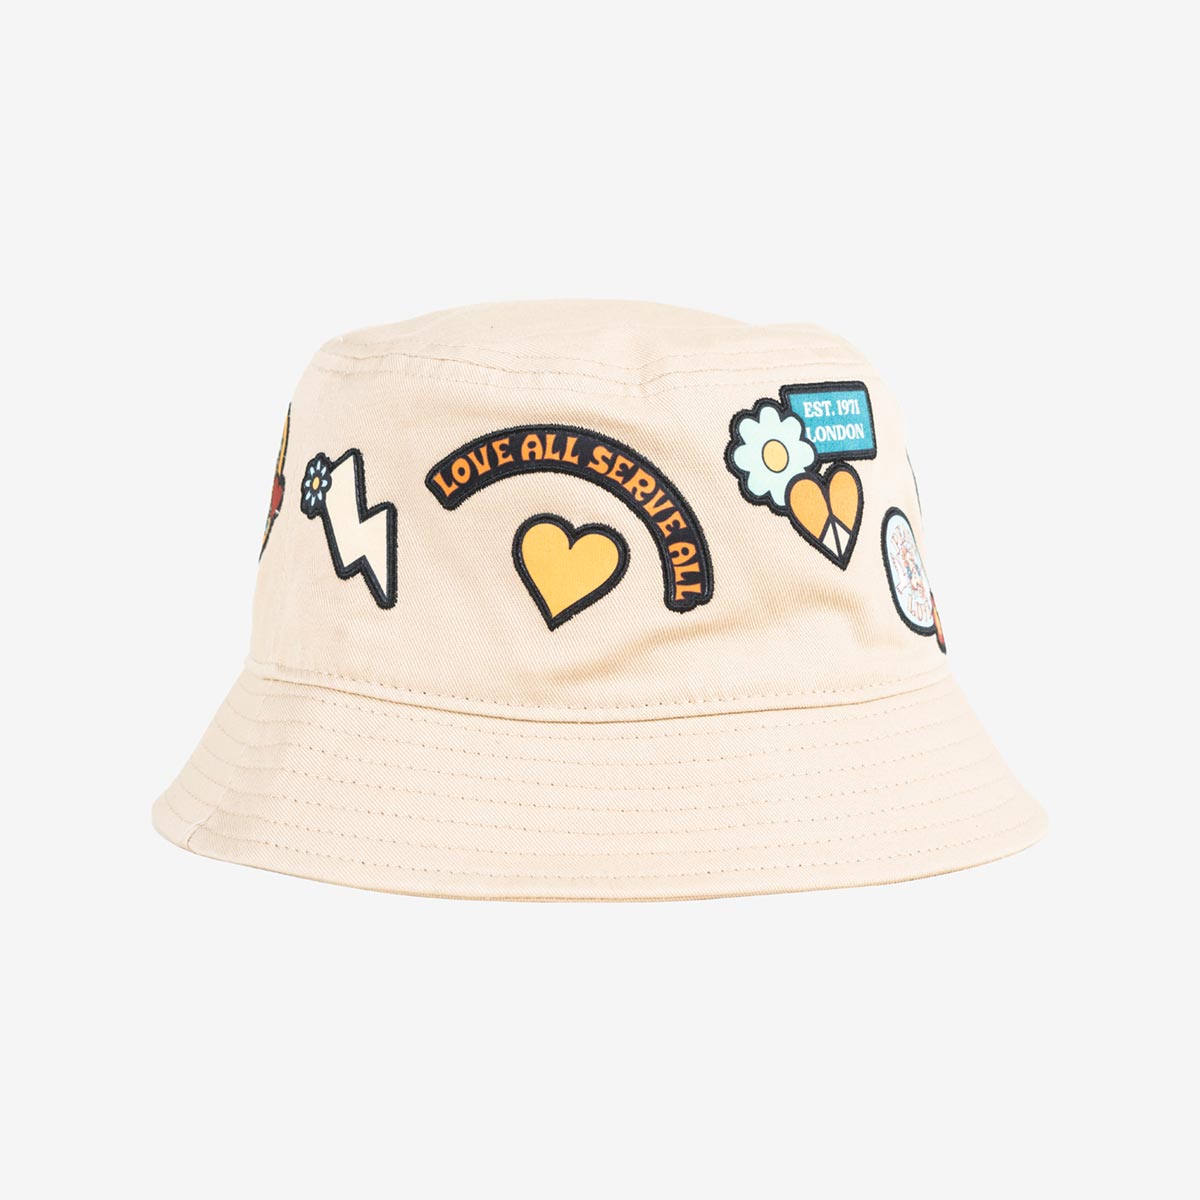 Hard Rock Music Festival Bucket Hat with Patches in Khaki image number 6